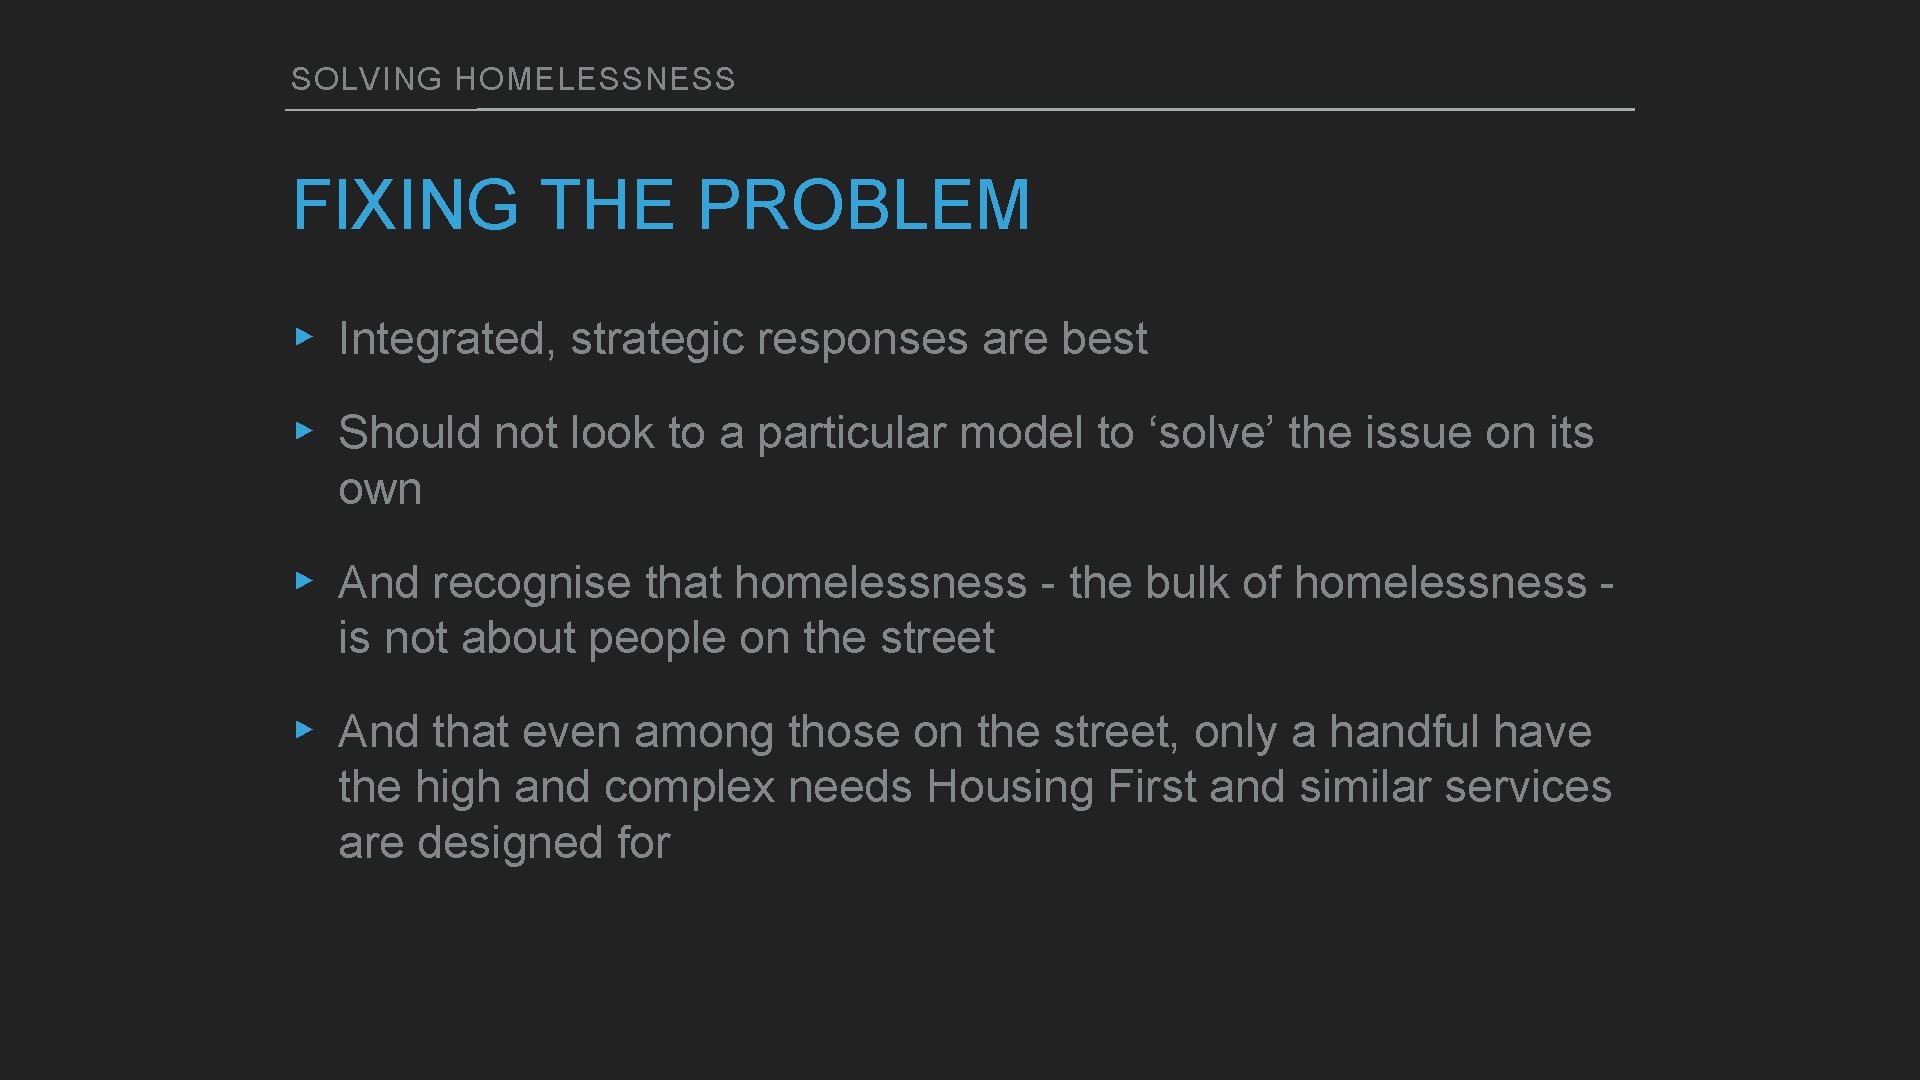 SOLVING HOMELESSNESS FIXING THE PROBLEM ▸ Integrated, strategic responses are best ▸ Should not